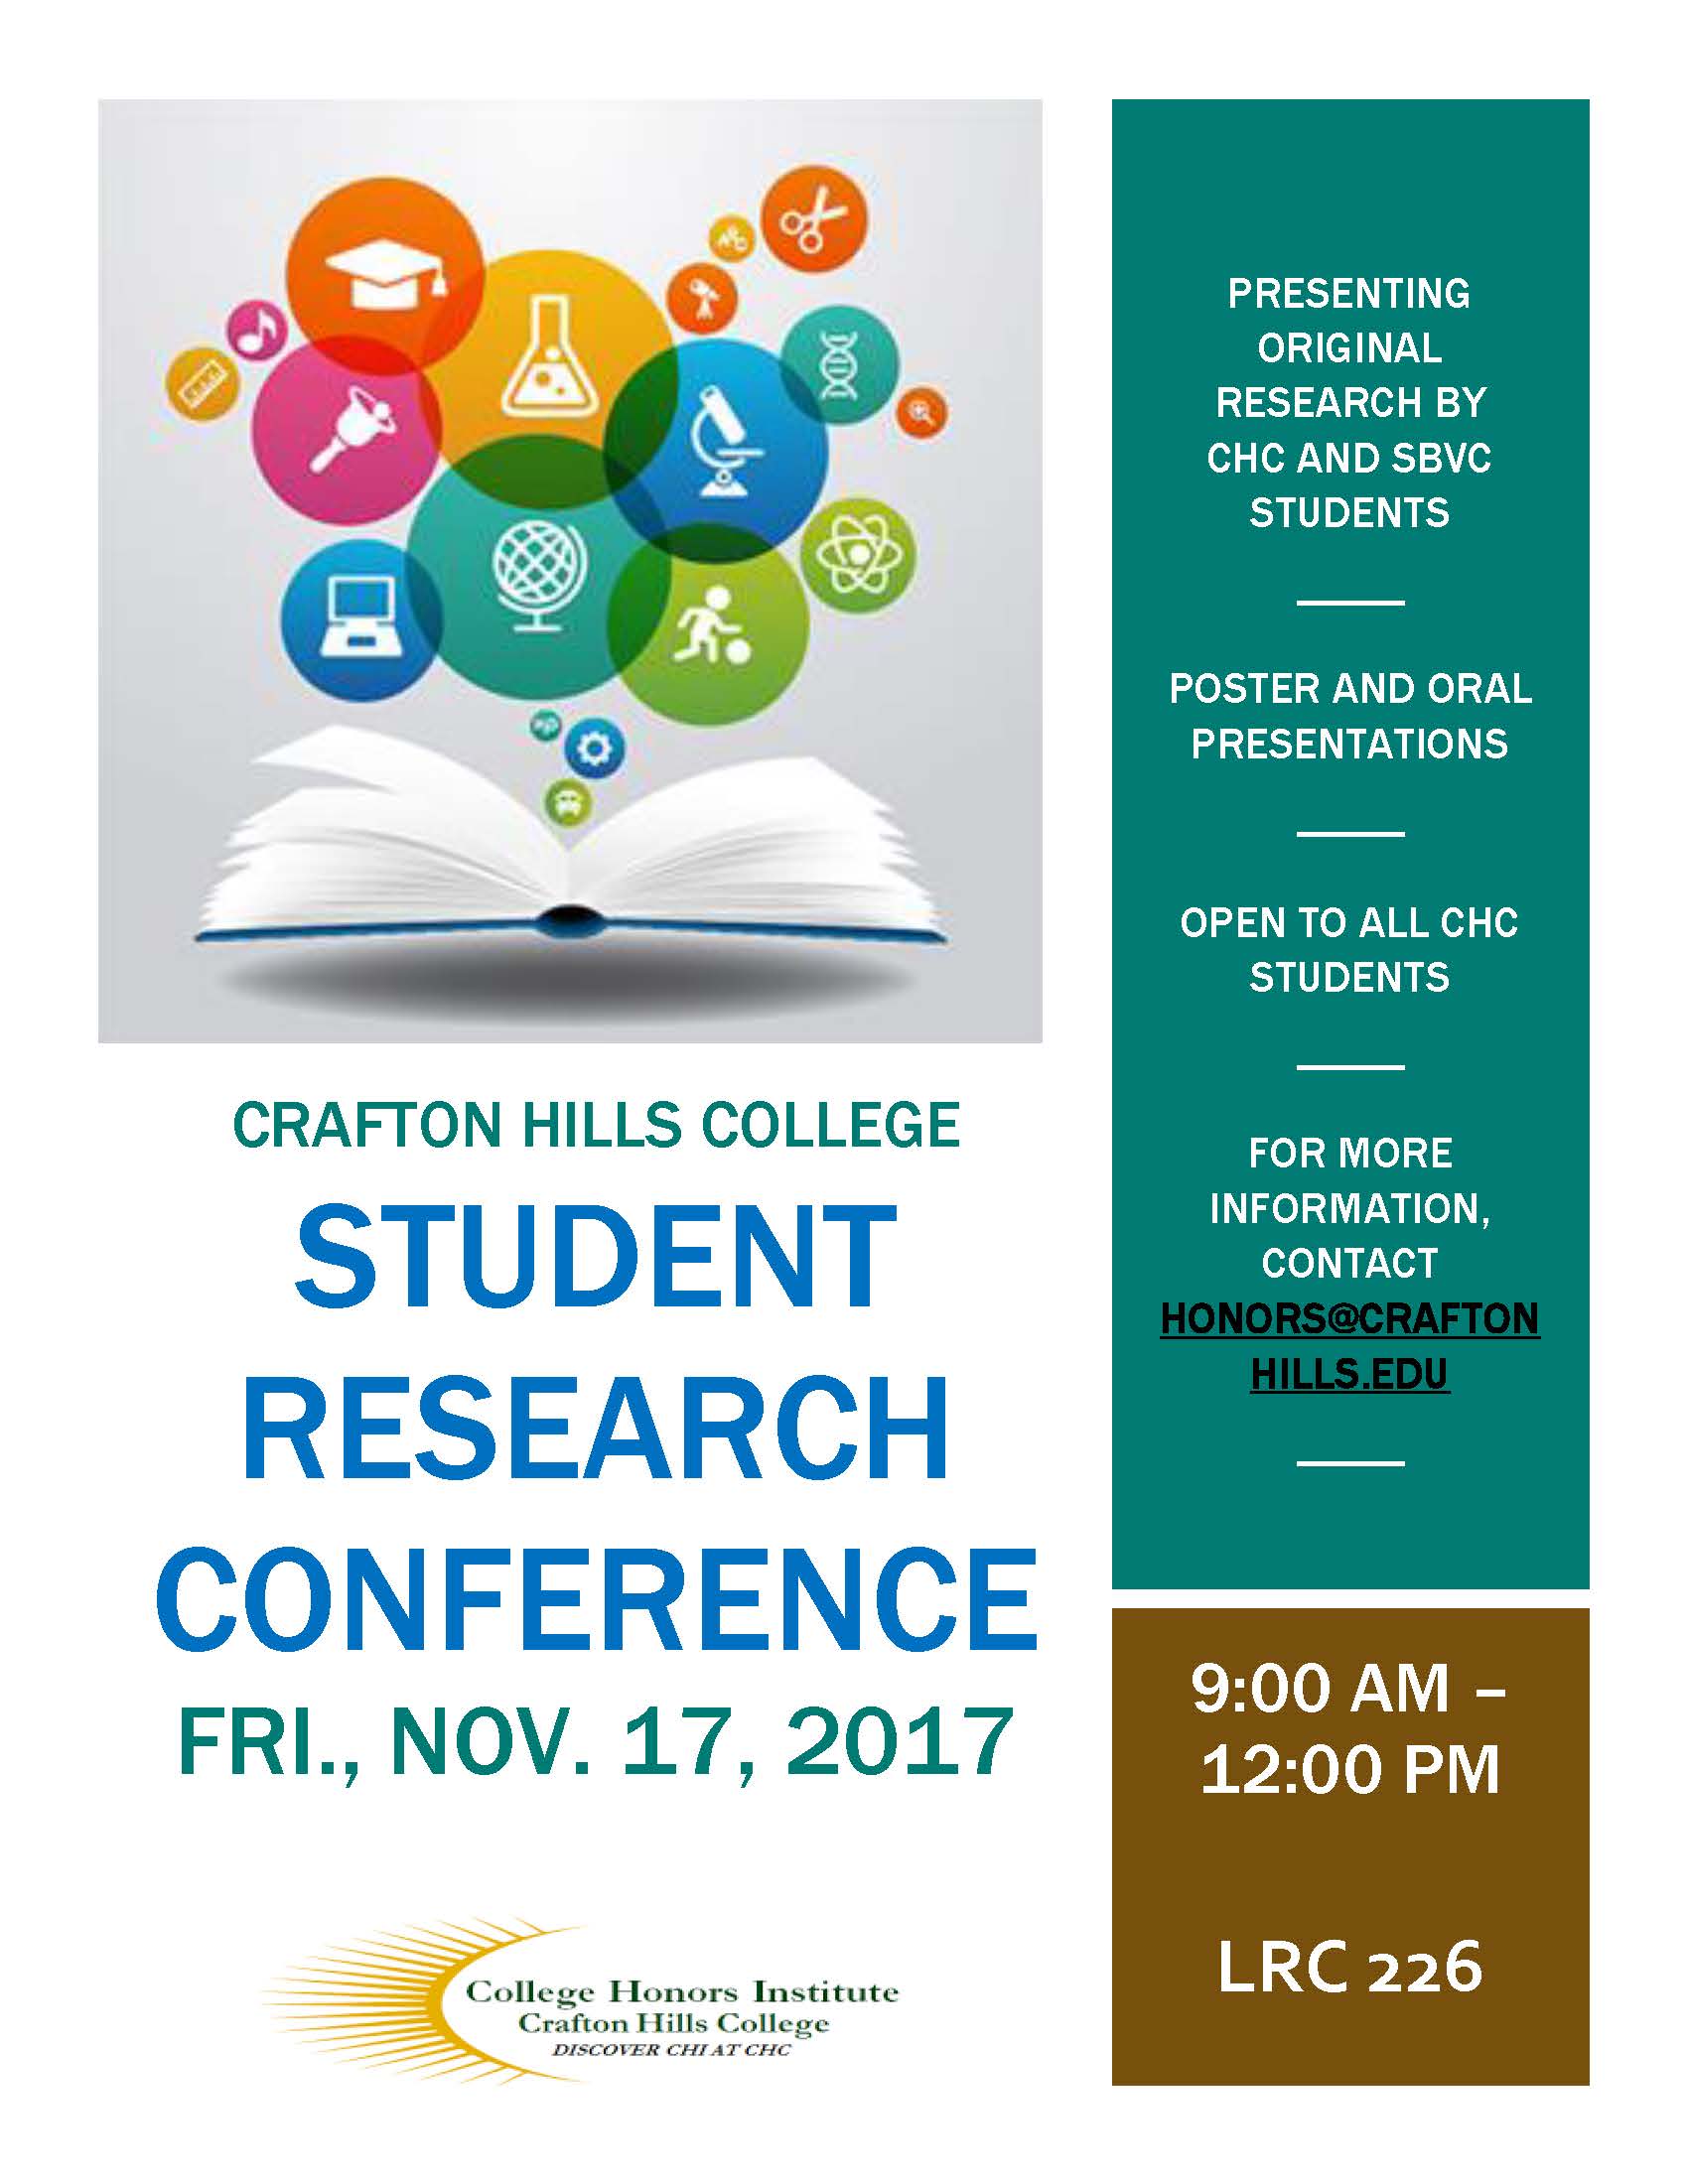 Student Research Conference